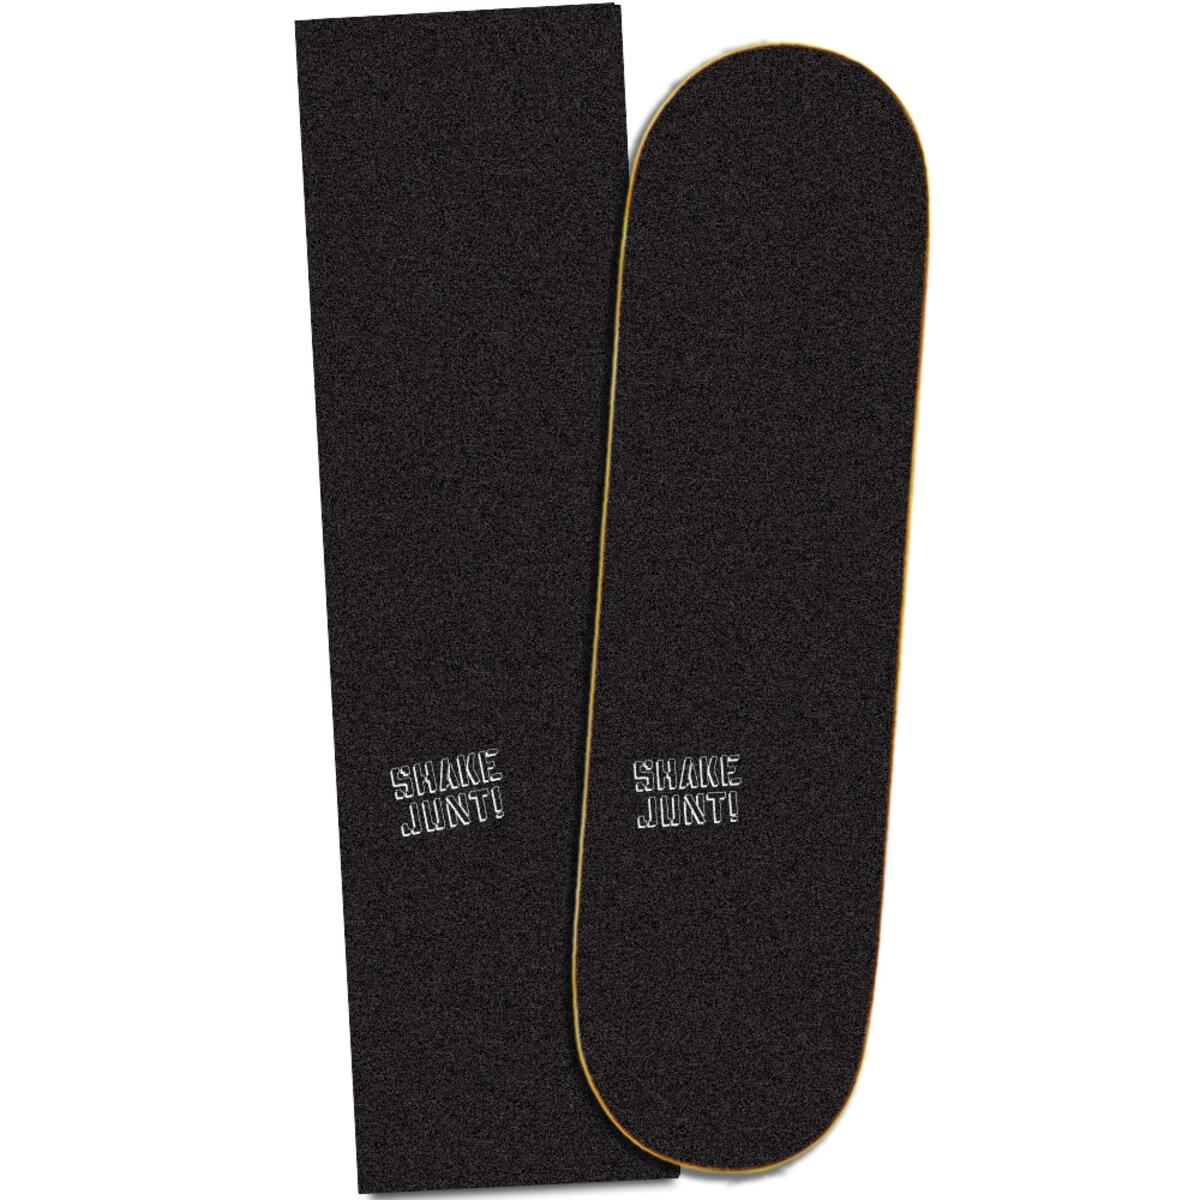 LV Grip Tape Drop be quick – Exist Skate Store